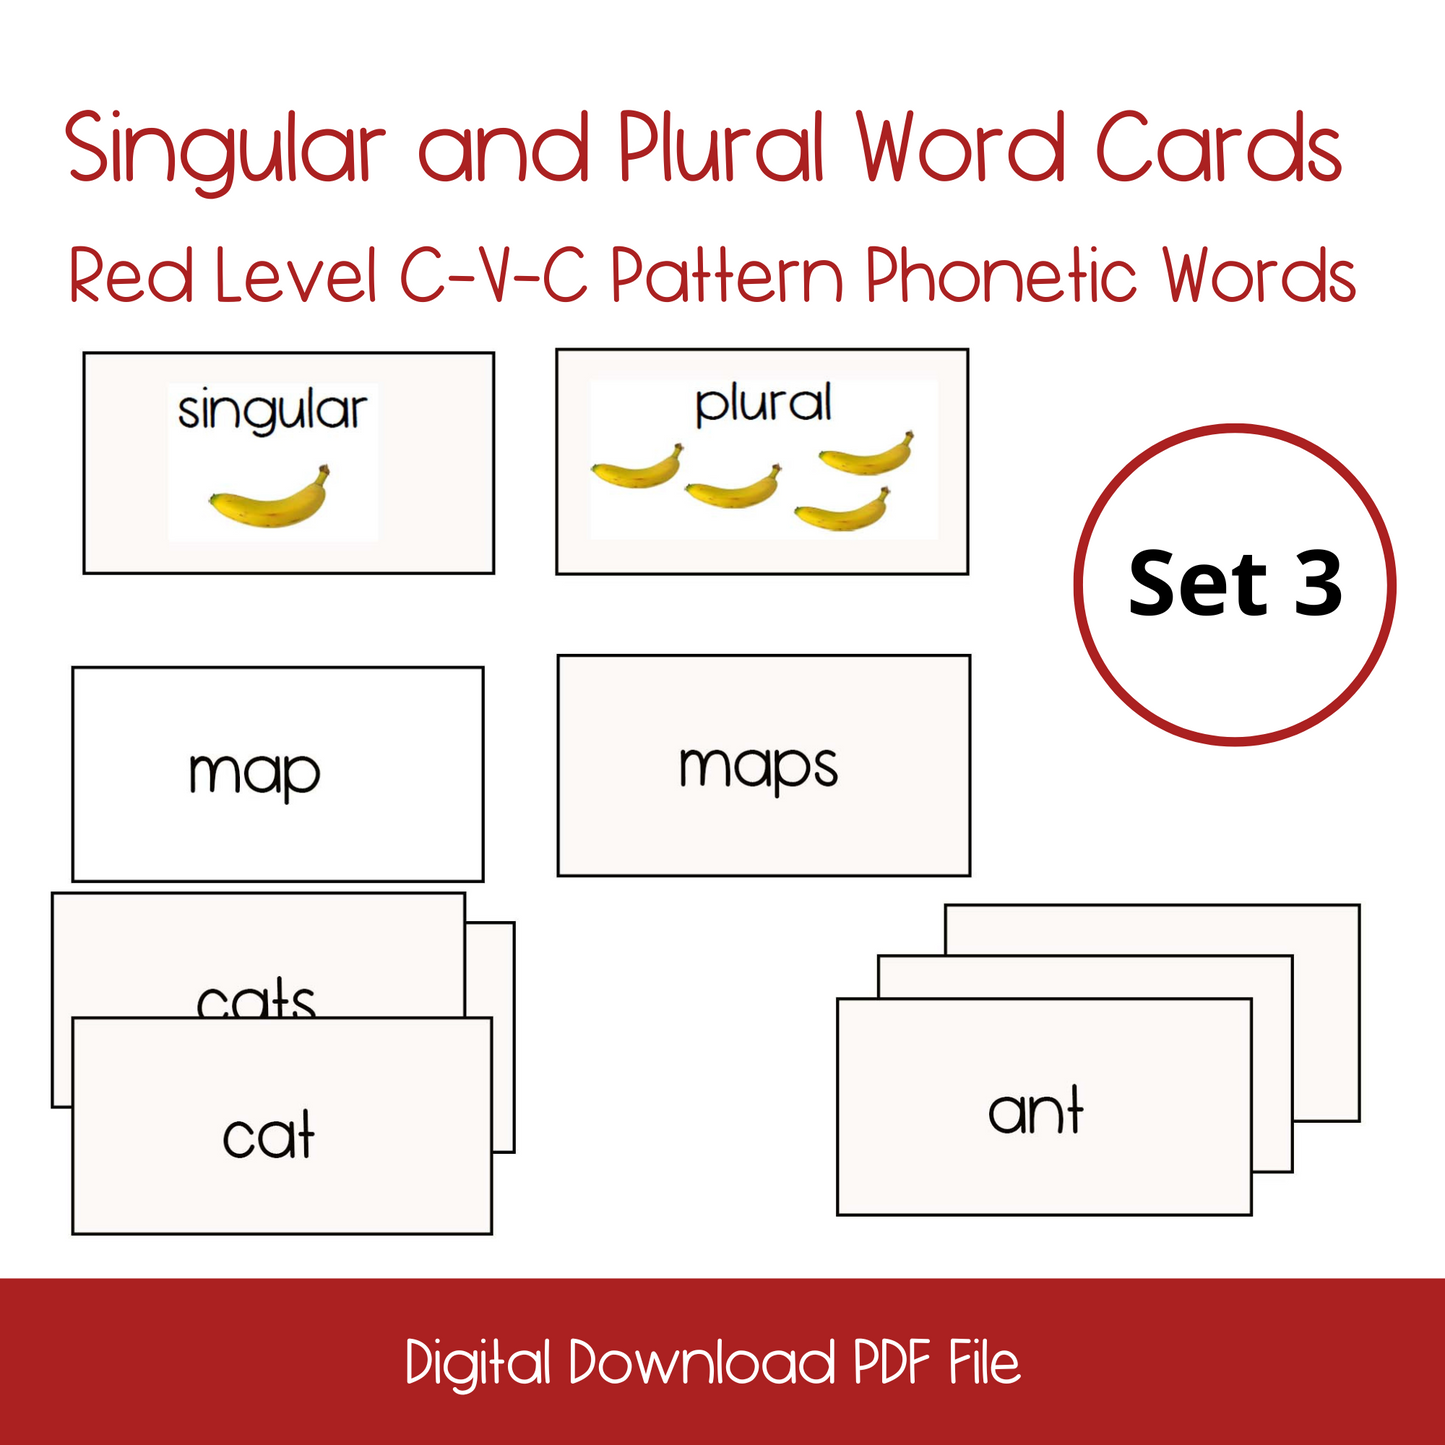 Singular and Plural Cards